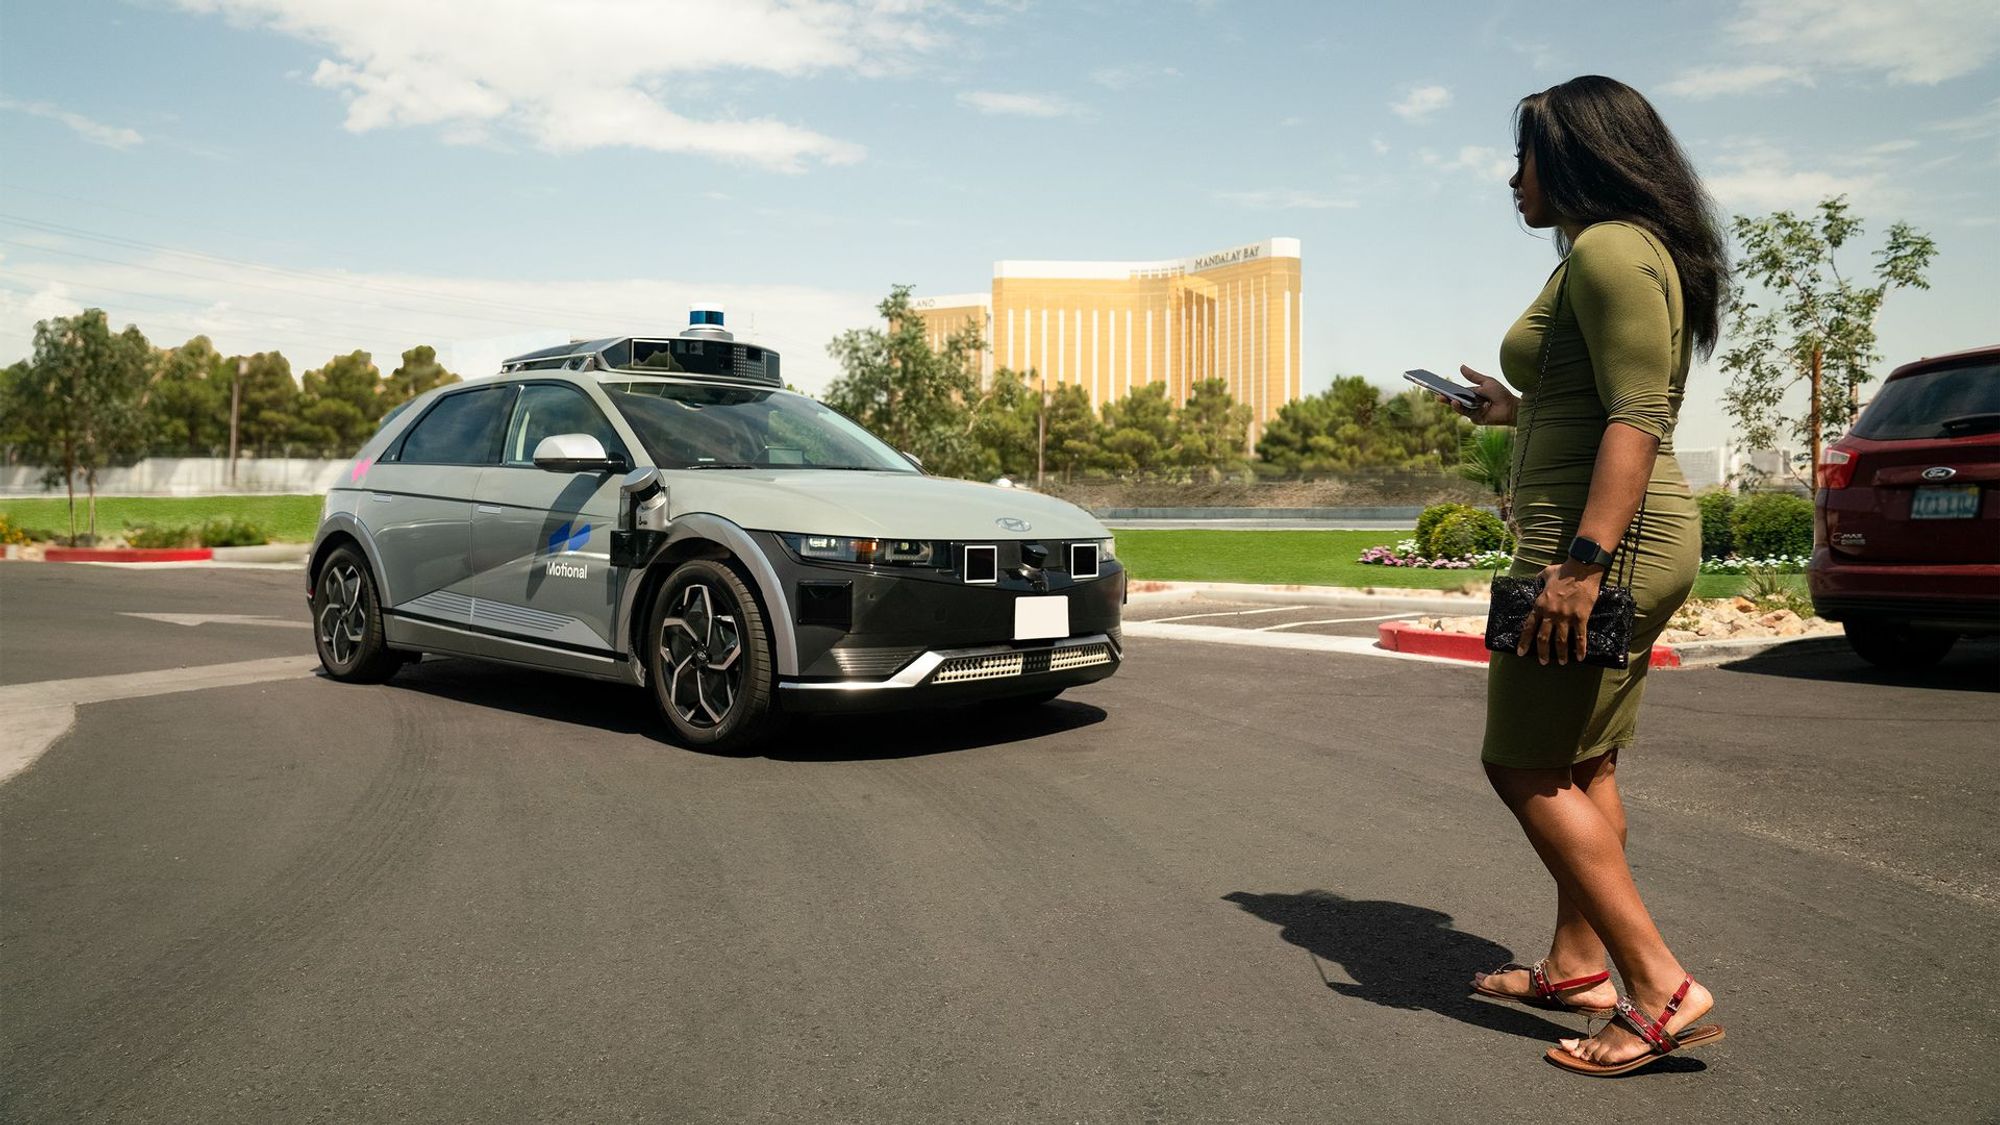 In Las Vegas, your Lyft driver could soon be a robot